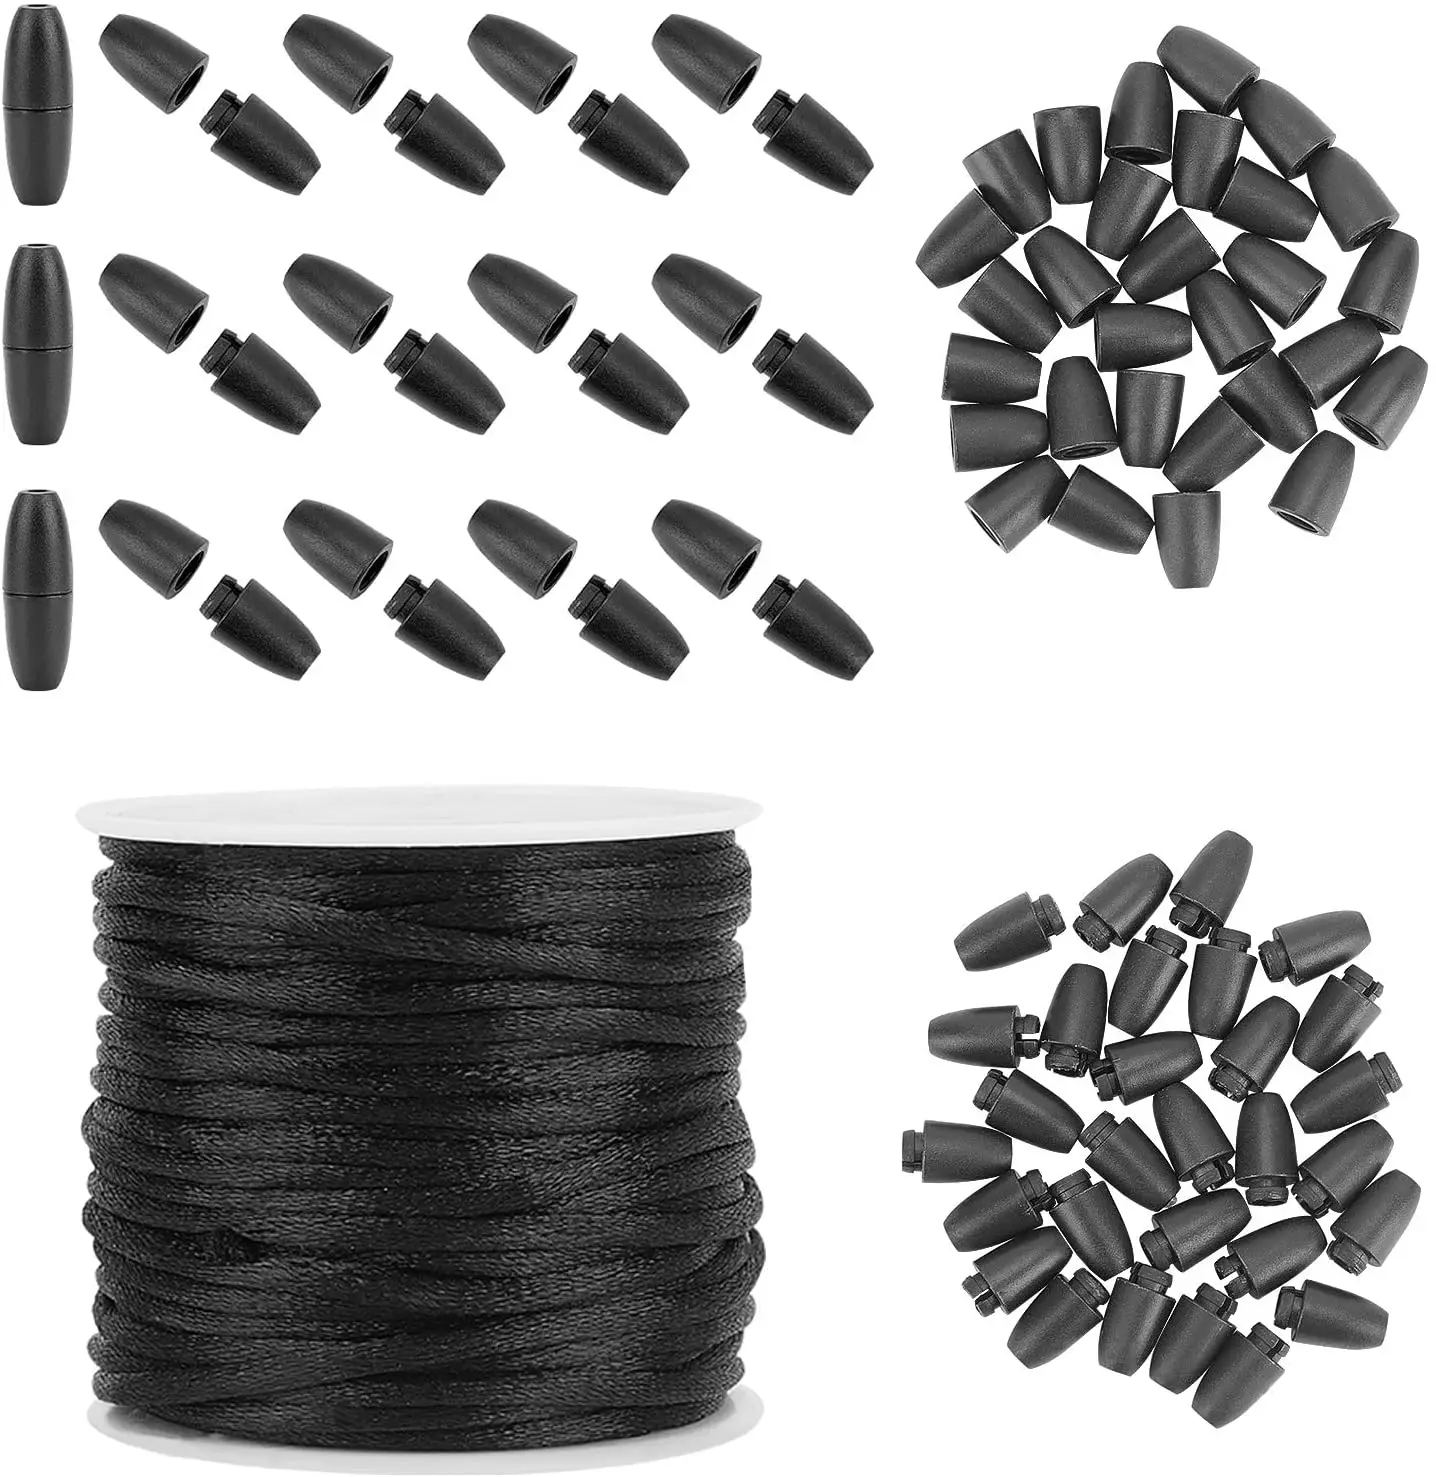 

30 Set Black 24mm Plastic Break Away Safety Clasp Buckle with 10m 2mm Nylon Braided String Cords for Jewelry DIY Craft Making